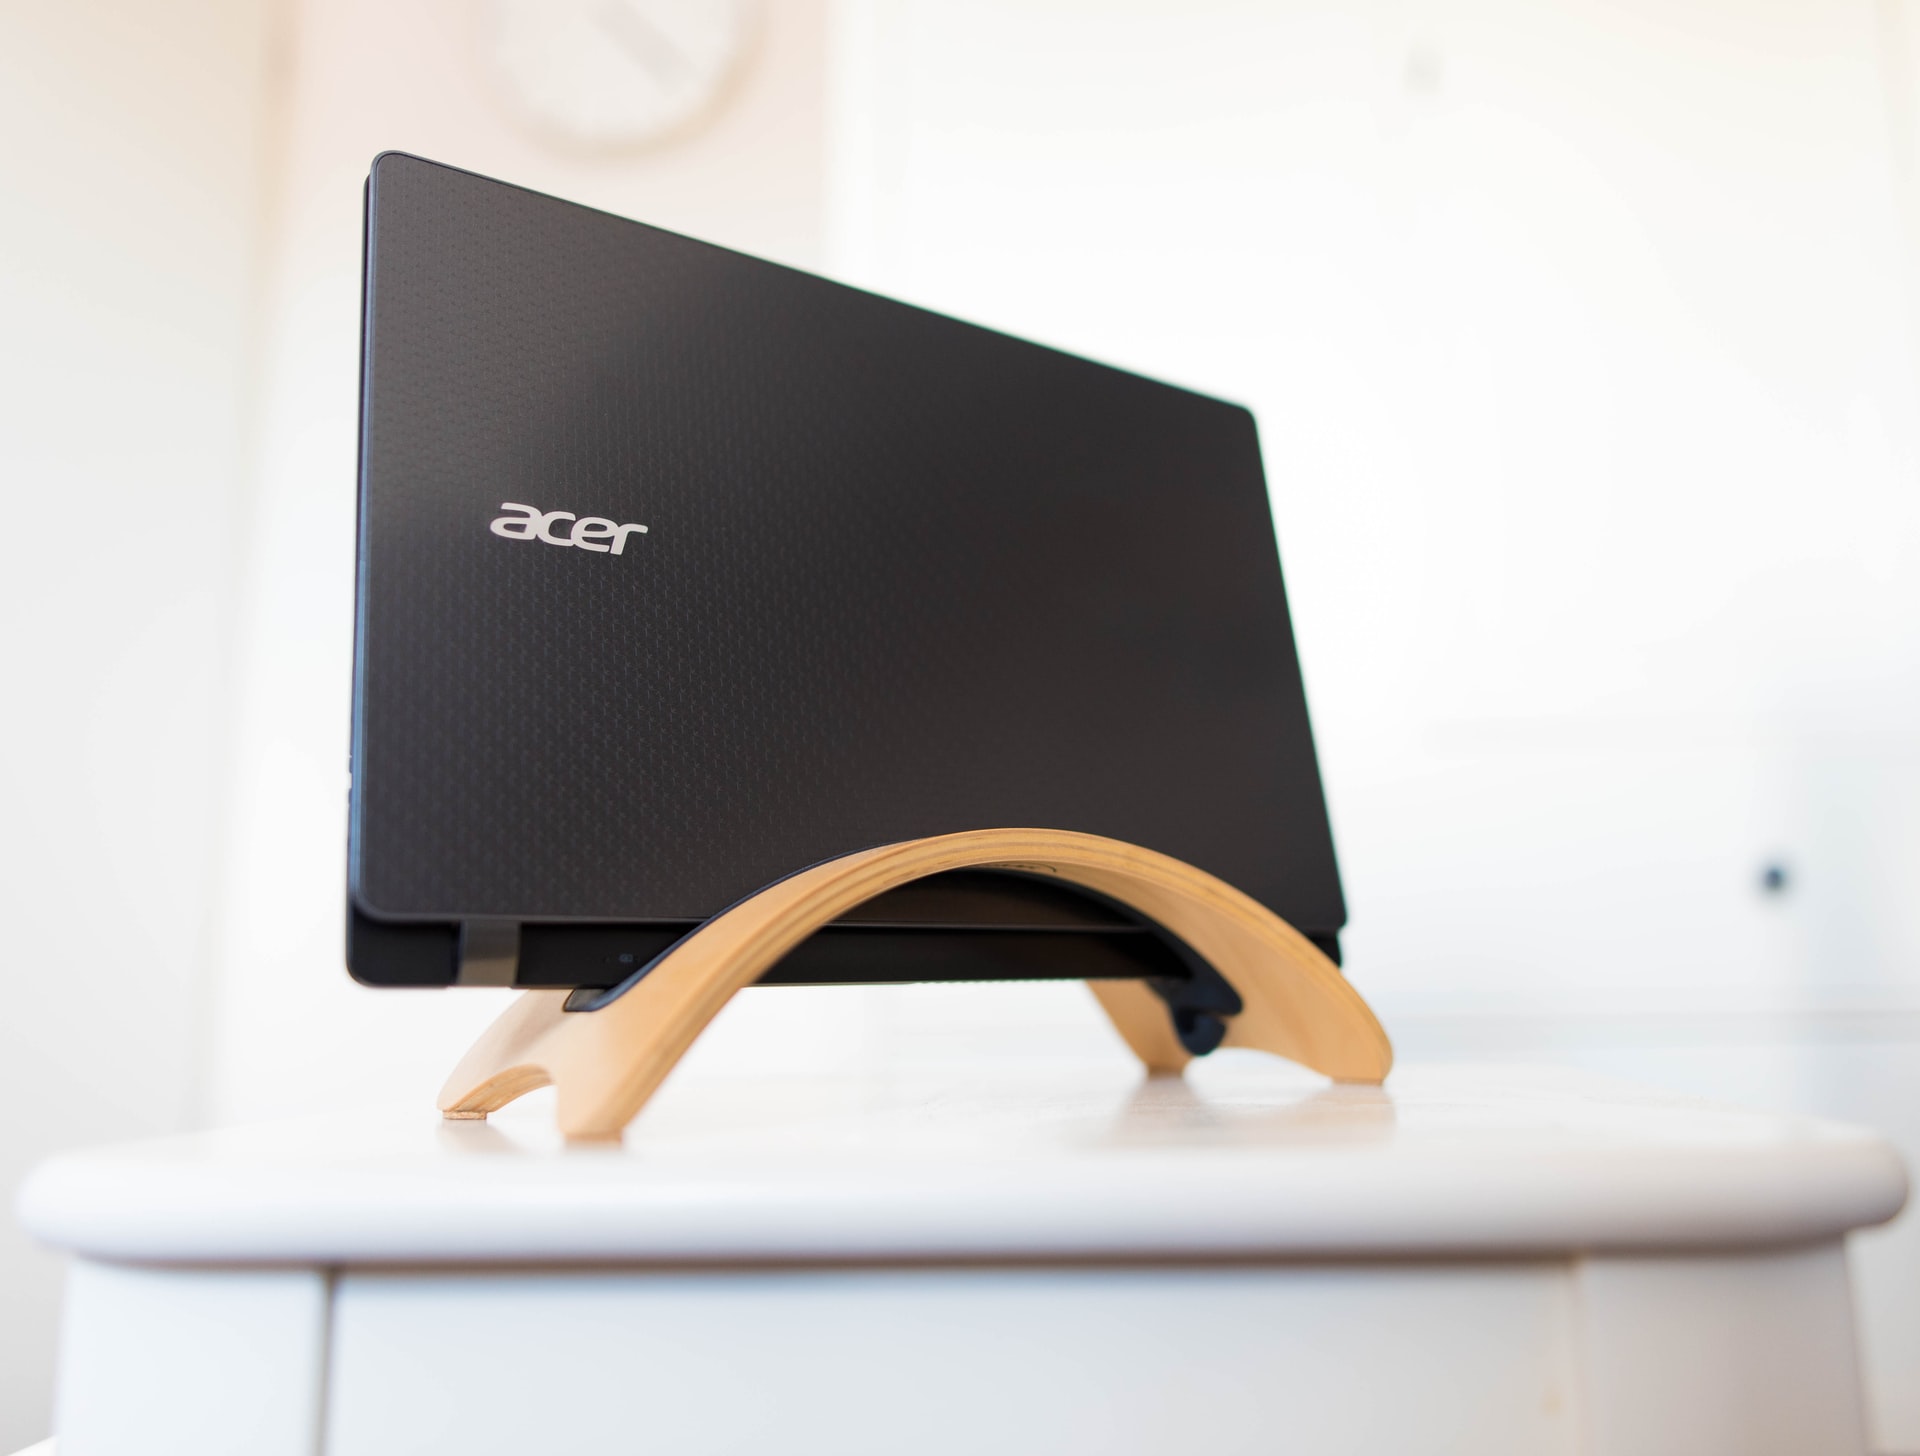 Acer reported a successful attack on its servers